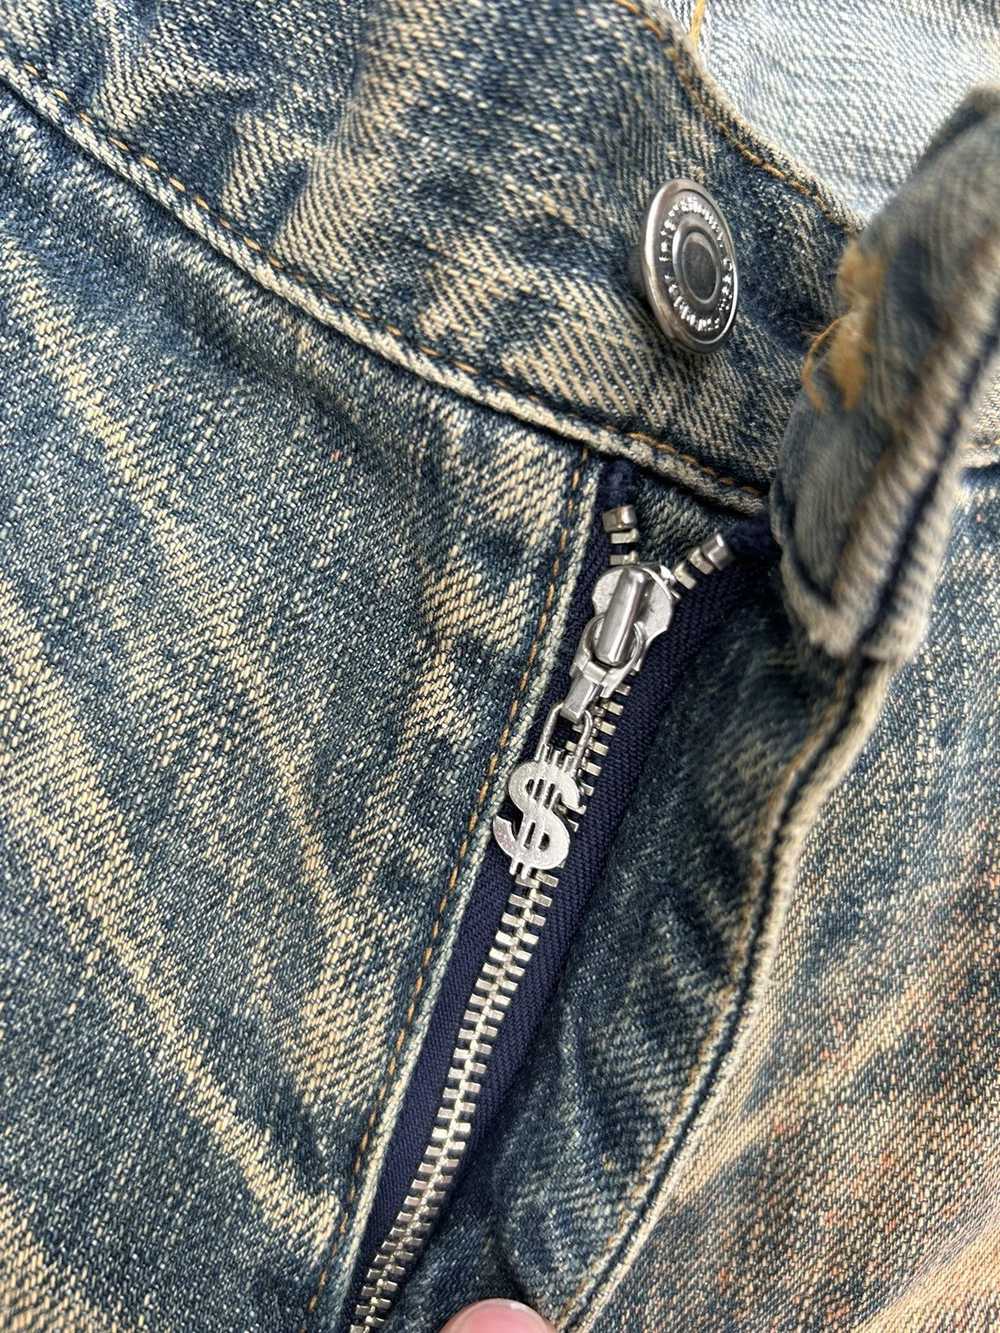 Swagger Swagger dyed selvedge denim jeans - image 5